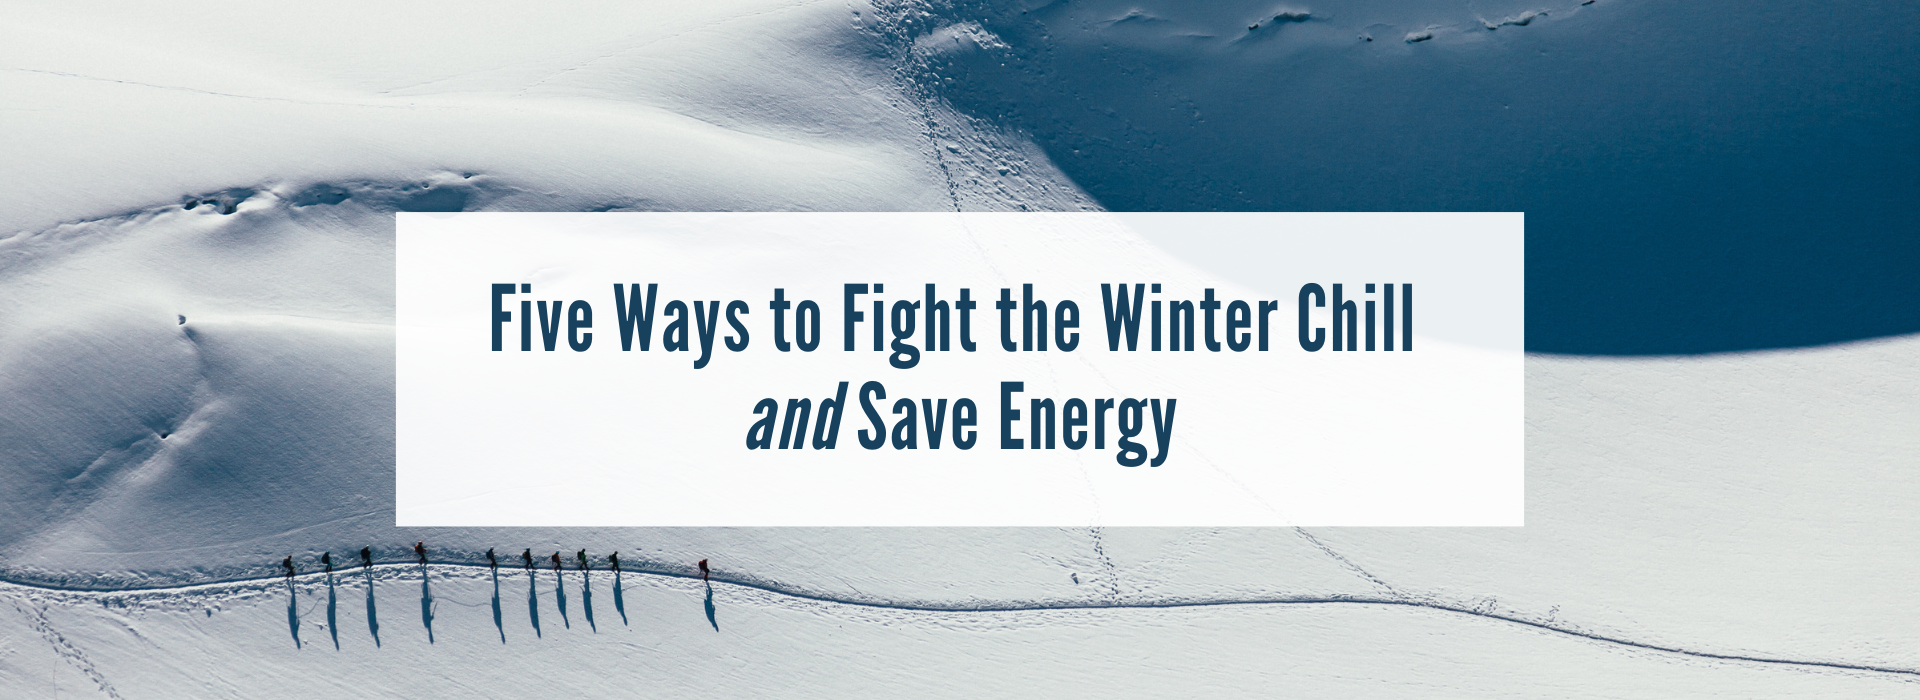 Five Ways to Fight the Winter Chill and Save Energy